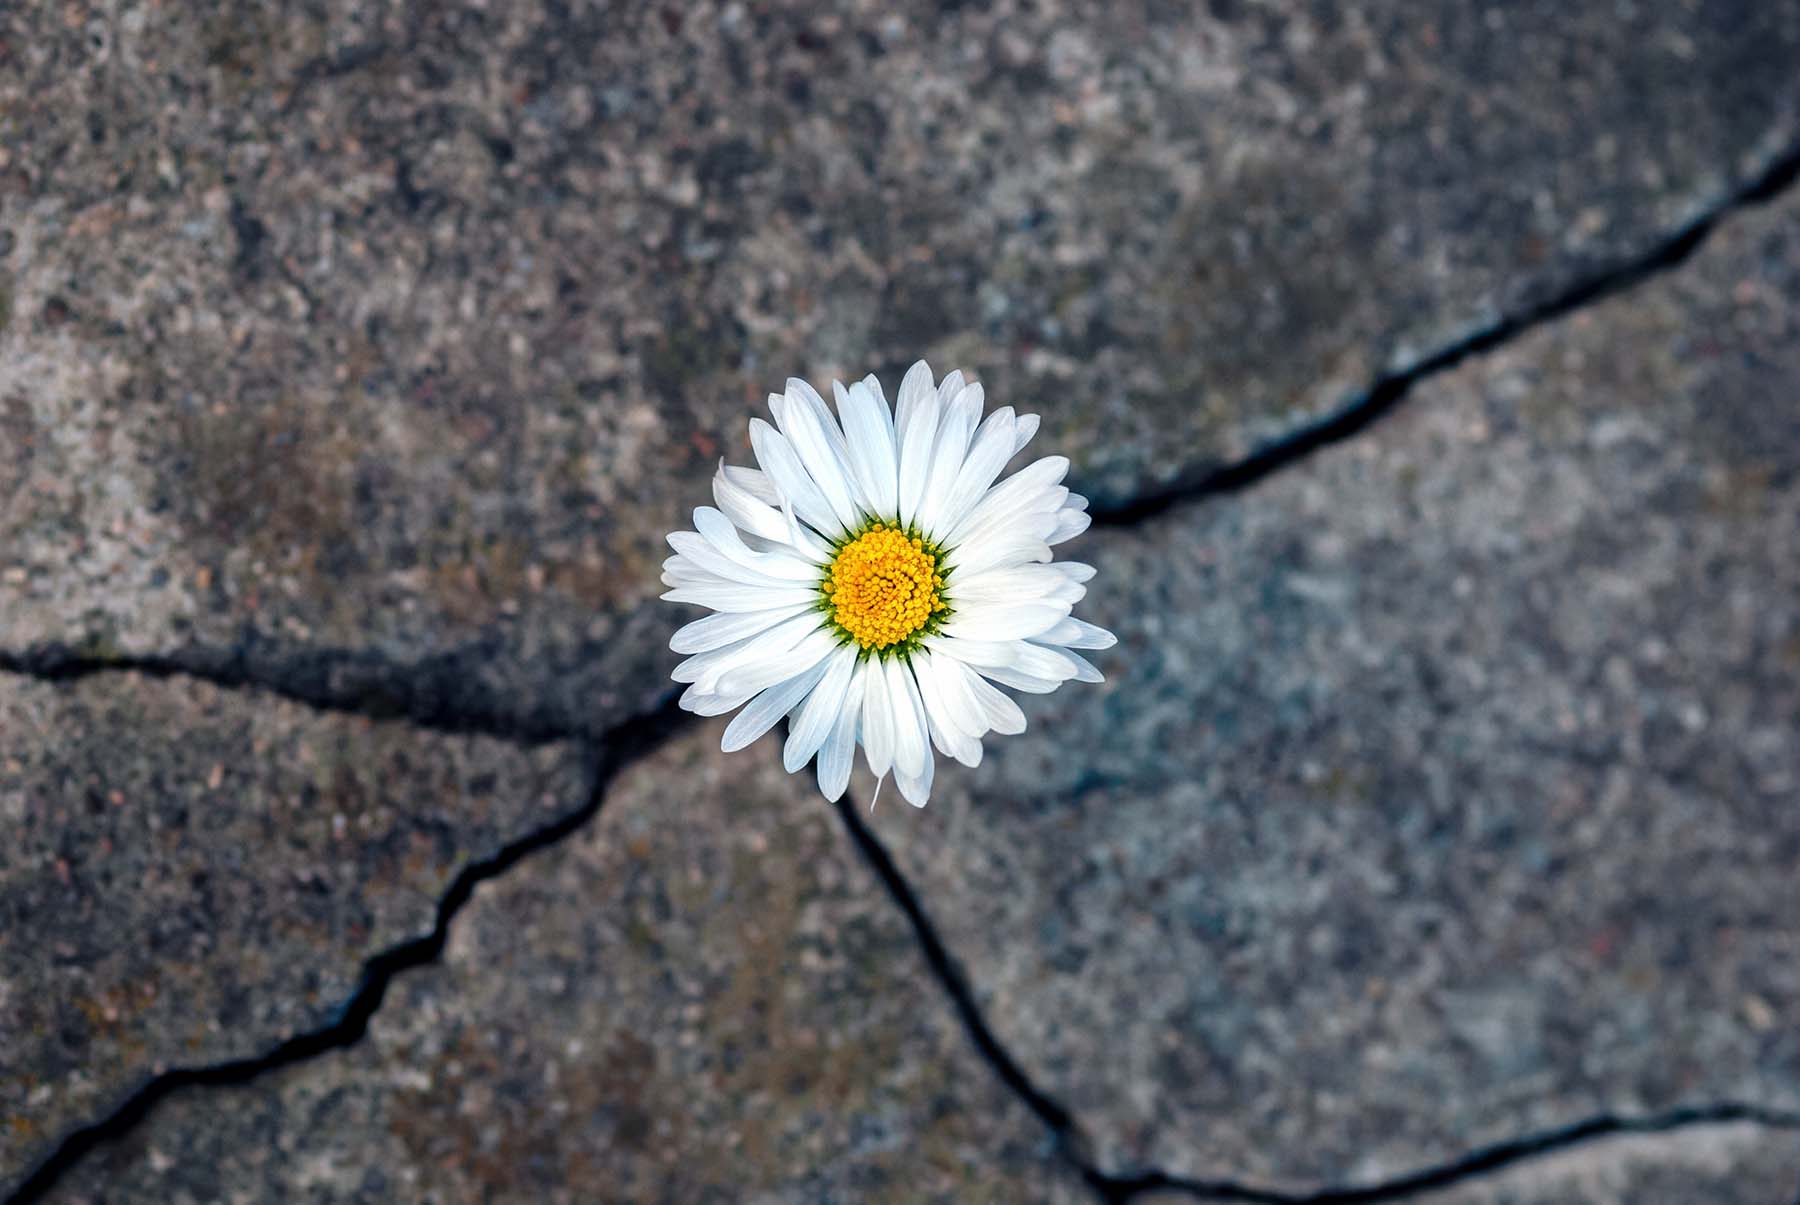 Daisy growing out of sidewalk